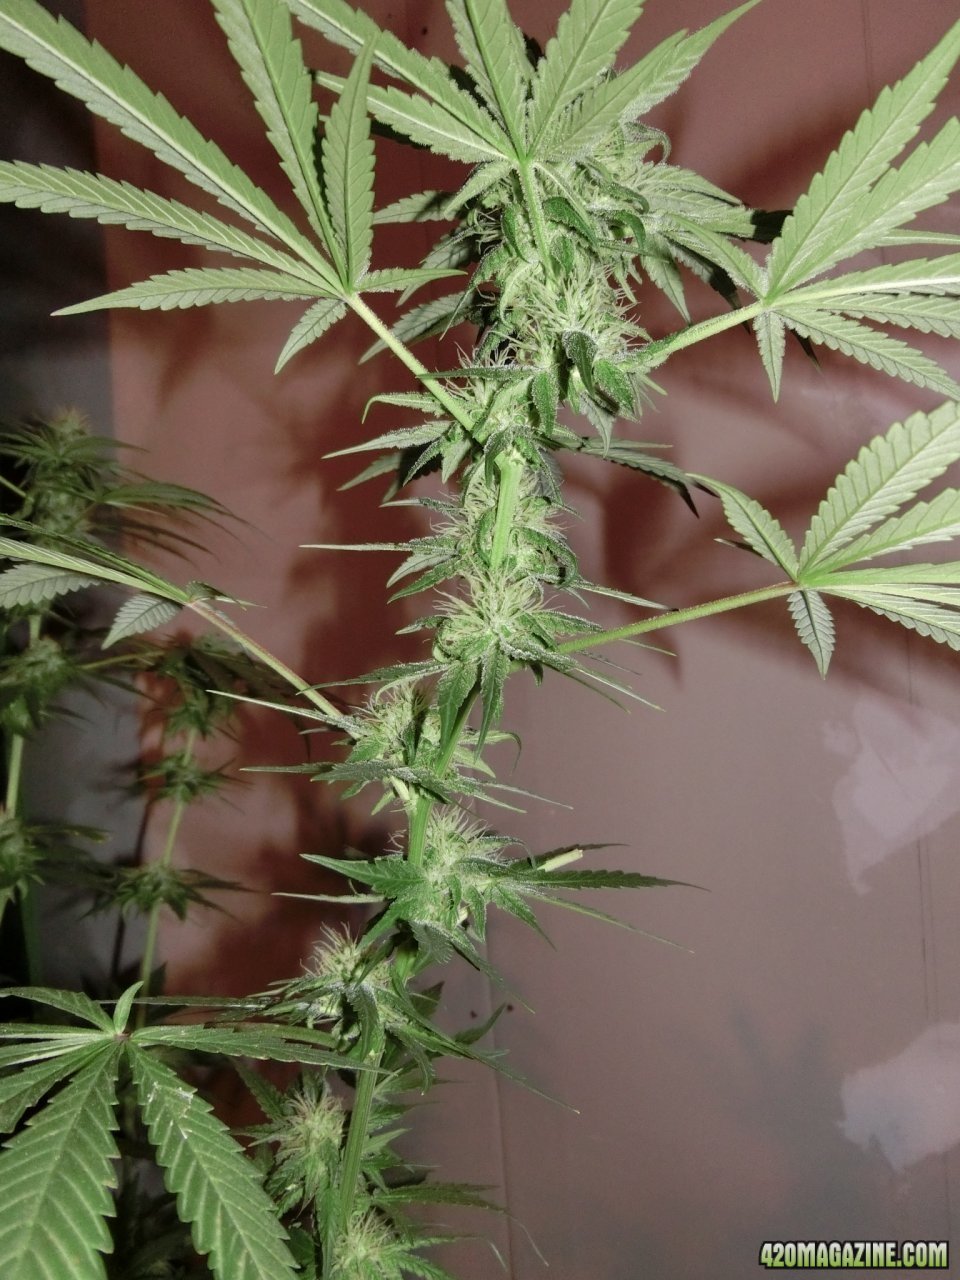 Day 84 Maui Waui Flower Day 36 - Buds are small but stacking. Good spacing.